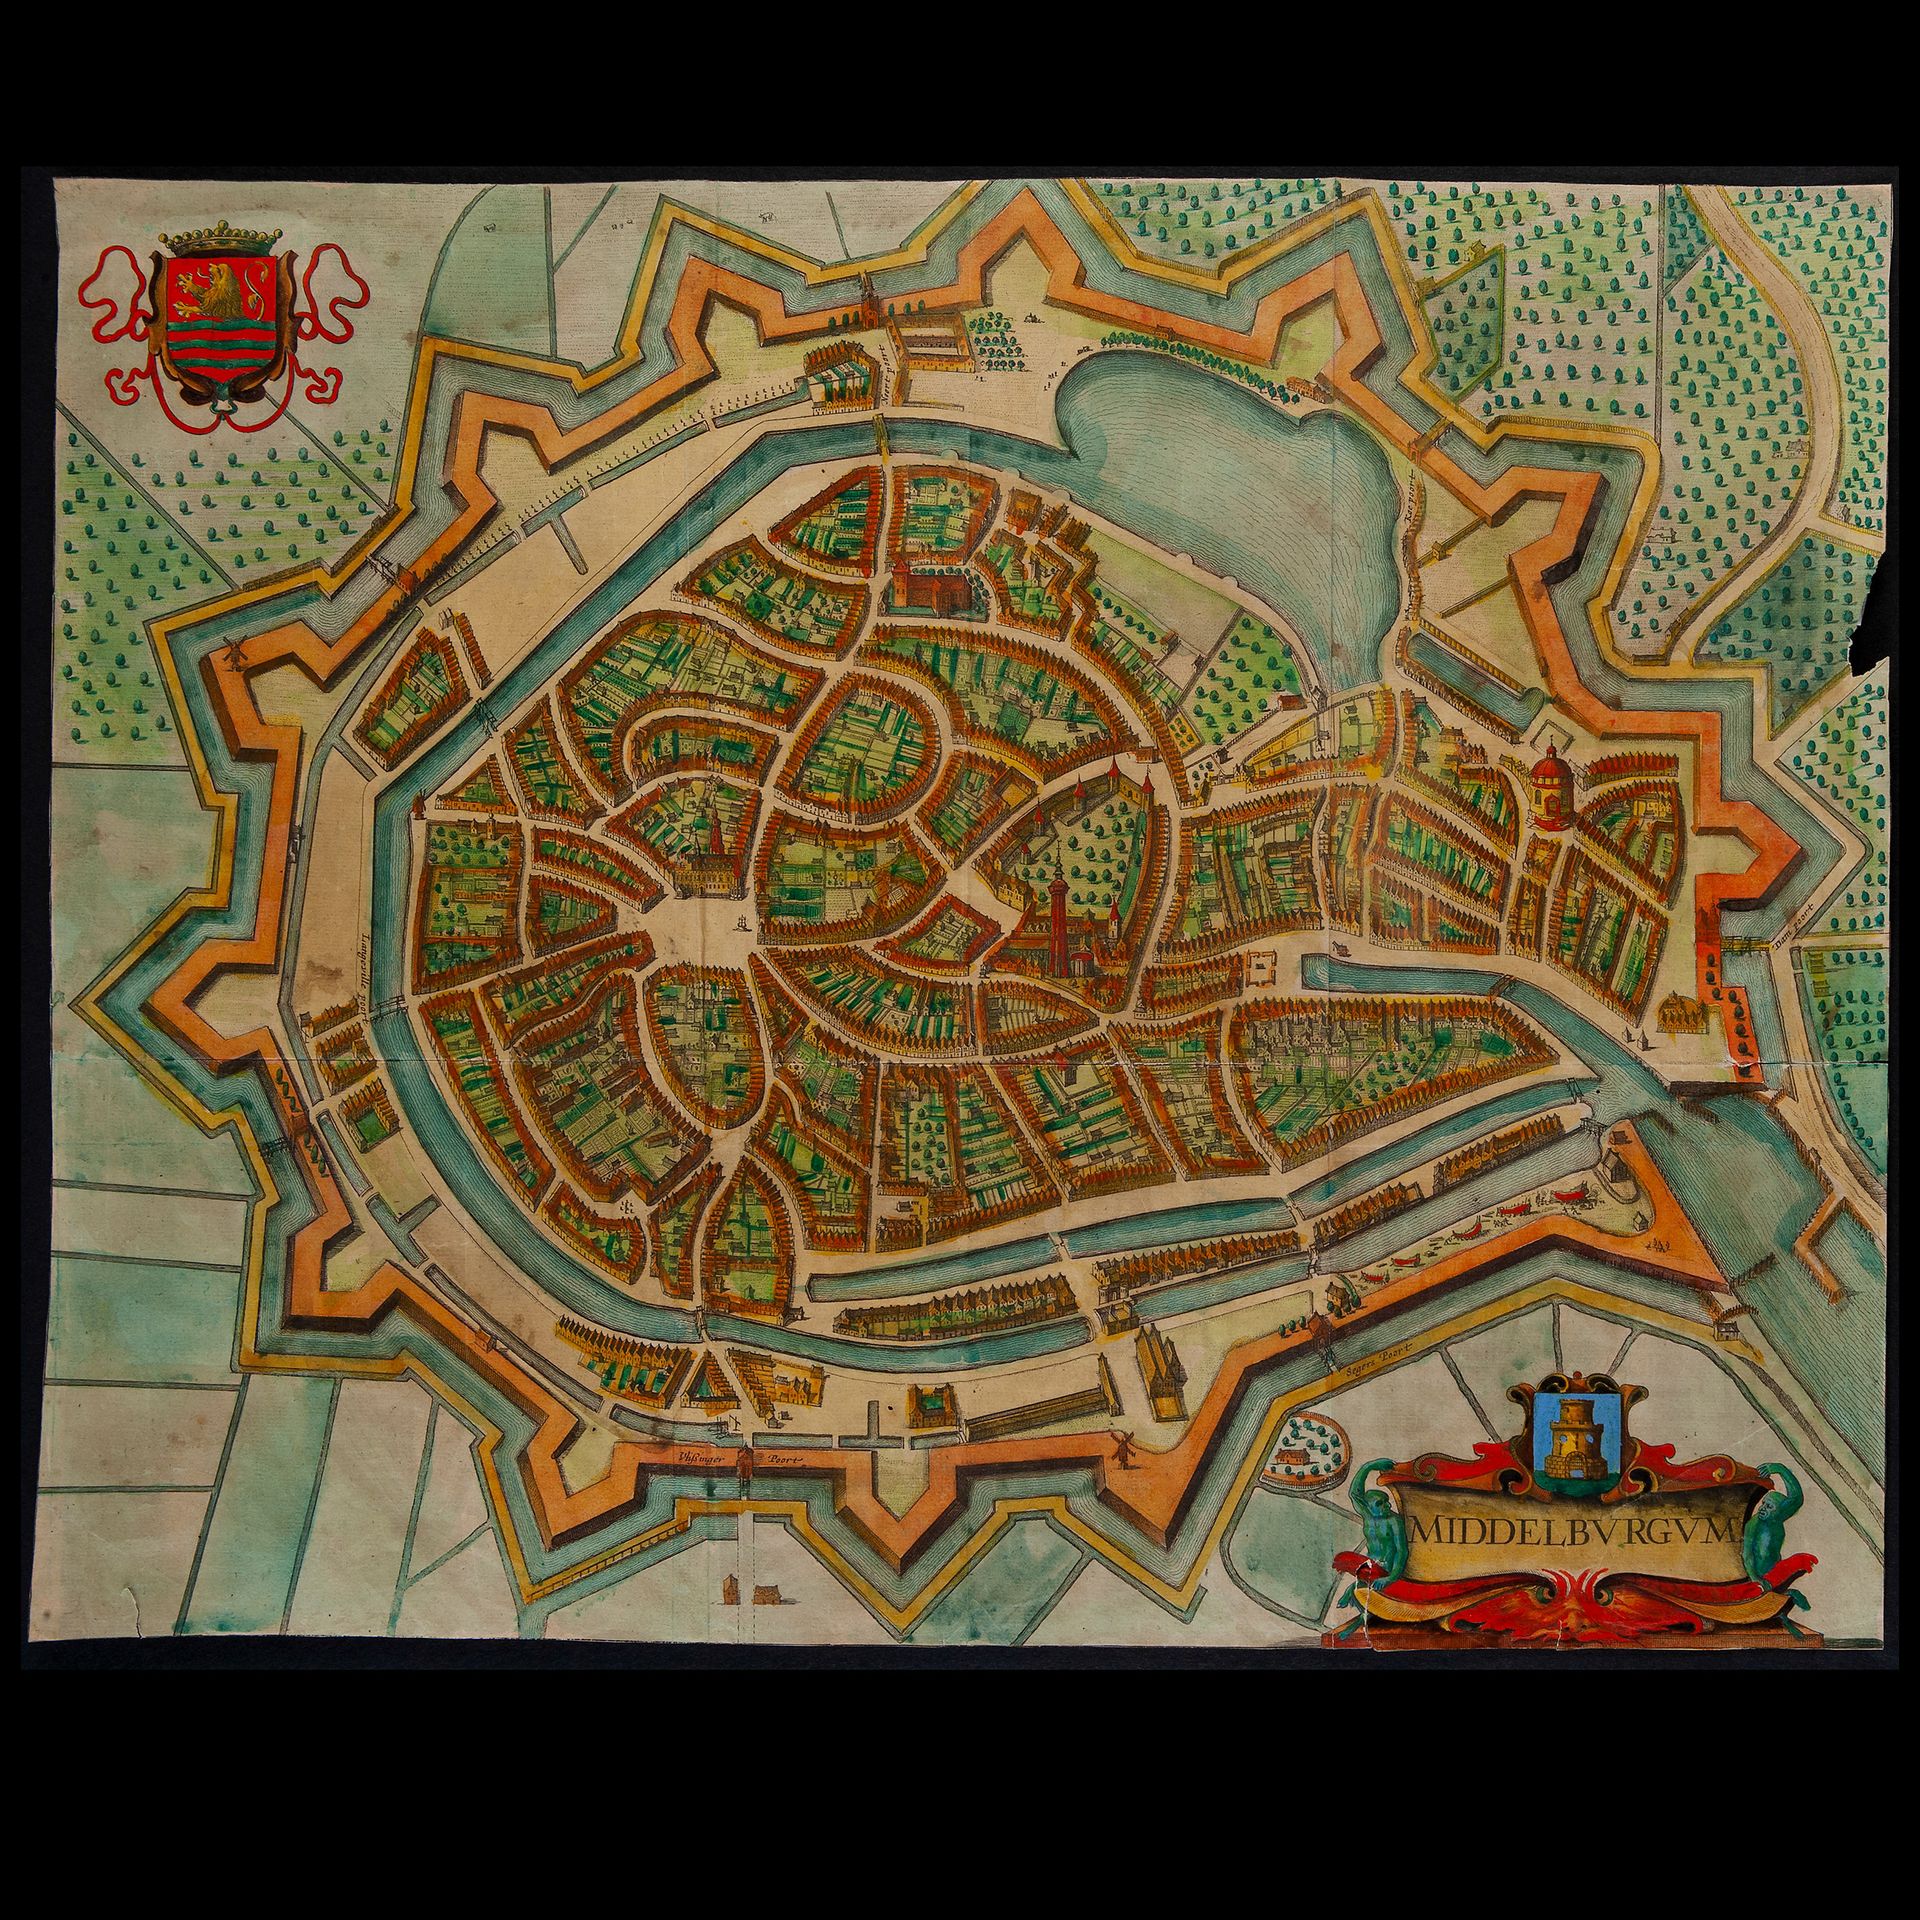 Painted map of the town of Middelburgum, second half of the 17th century Aquarel&hellip;